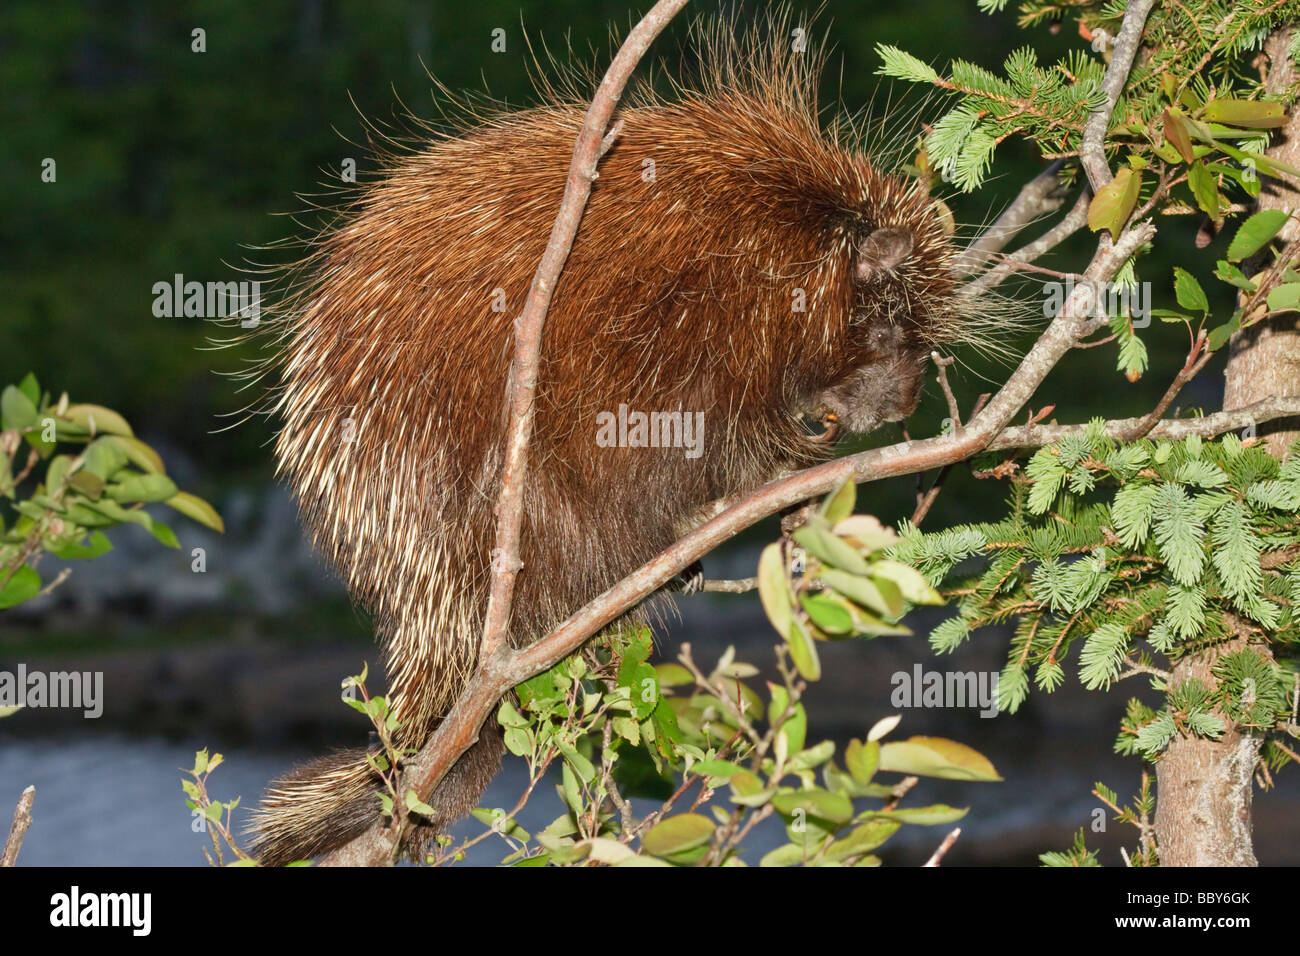 A porcupine resting on a branch Stock Photo